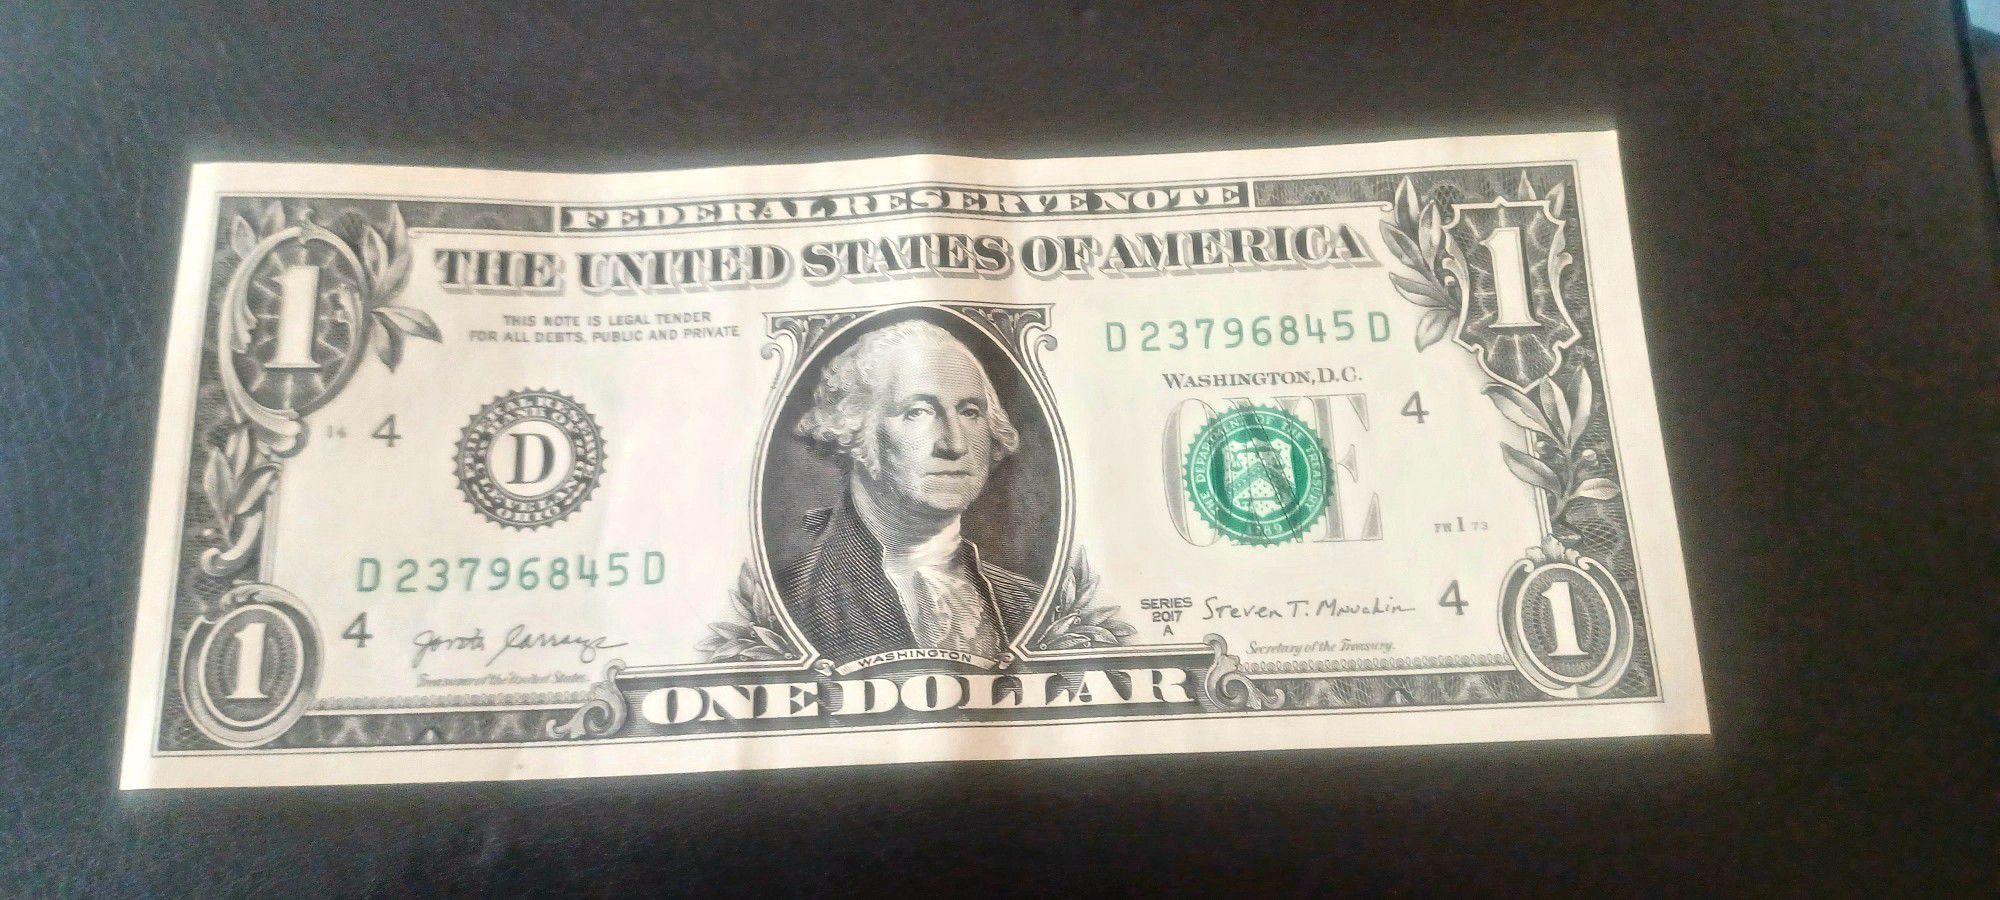 $1 Bill with 8 Consecutive Numbers